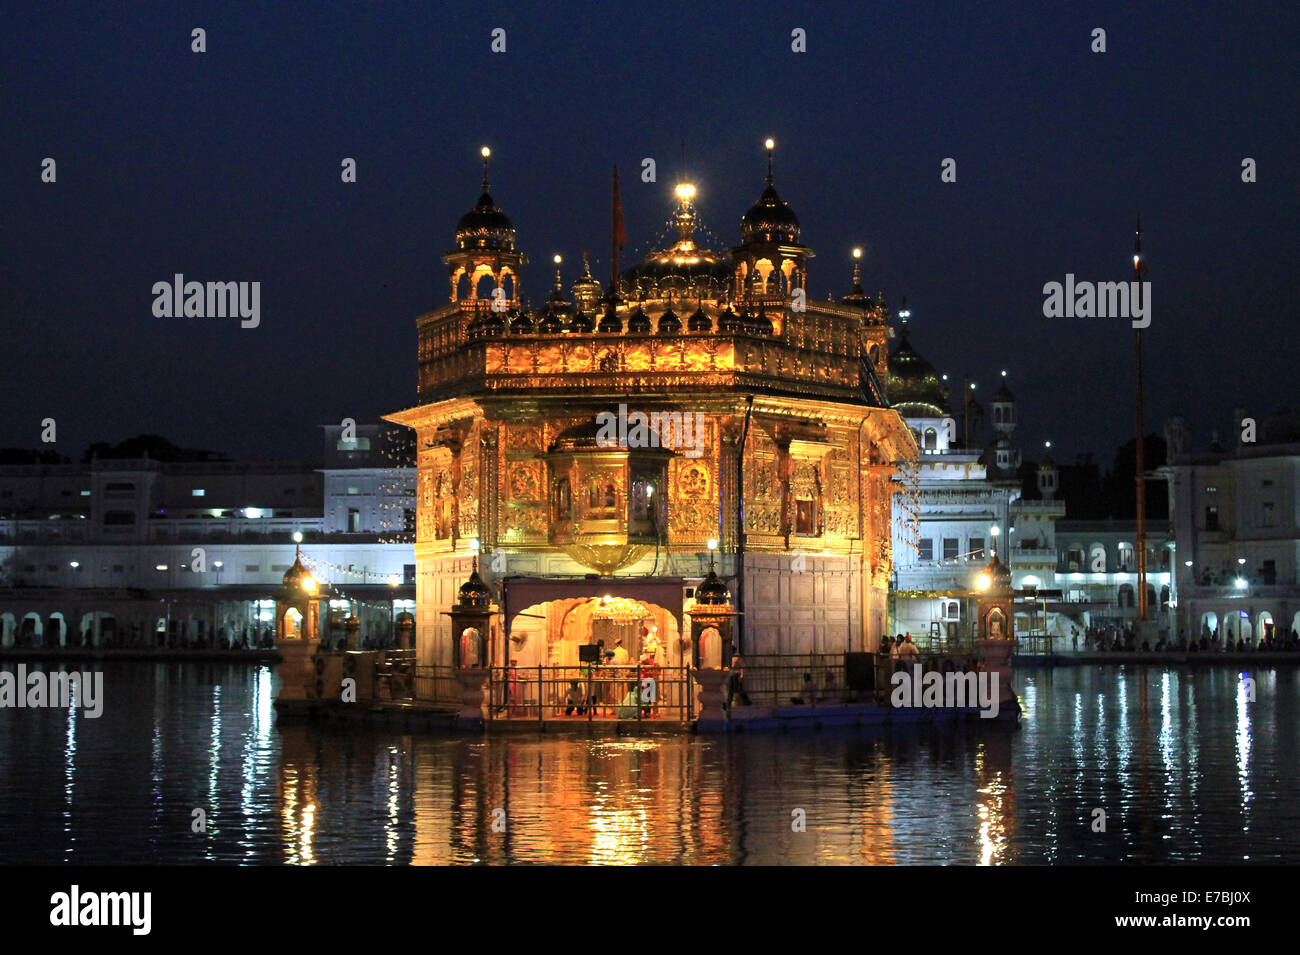 The Golden Temple in Amritsar, India Stock Photo